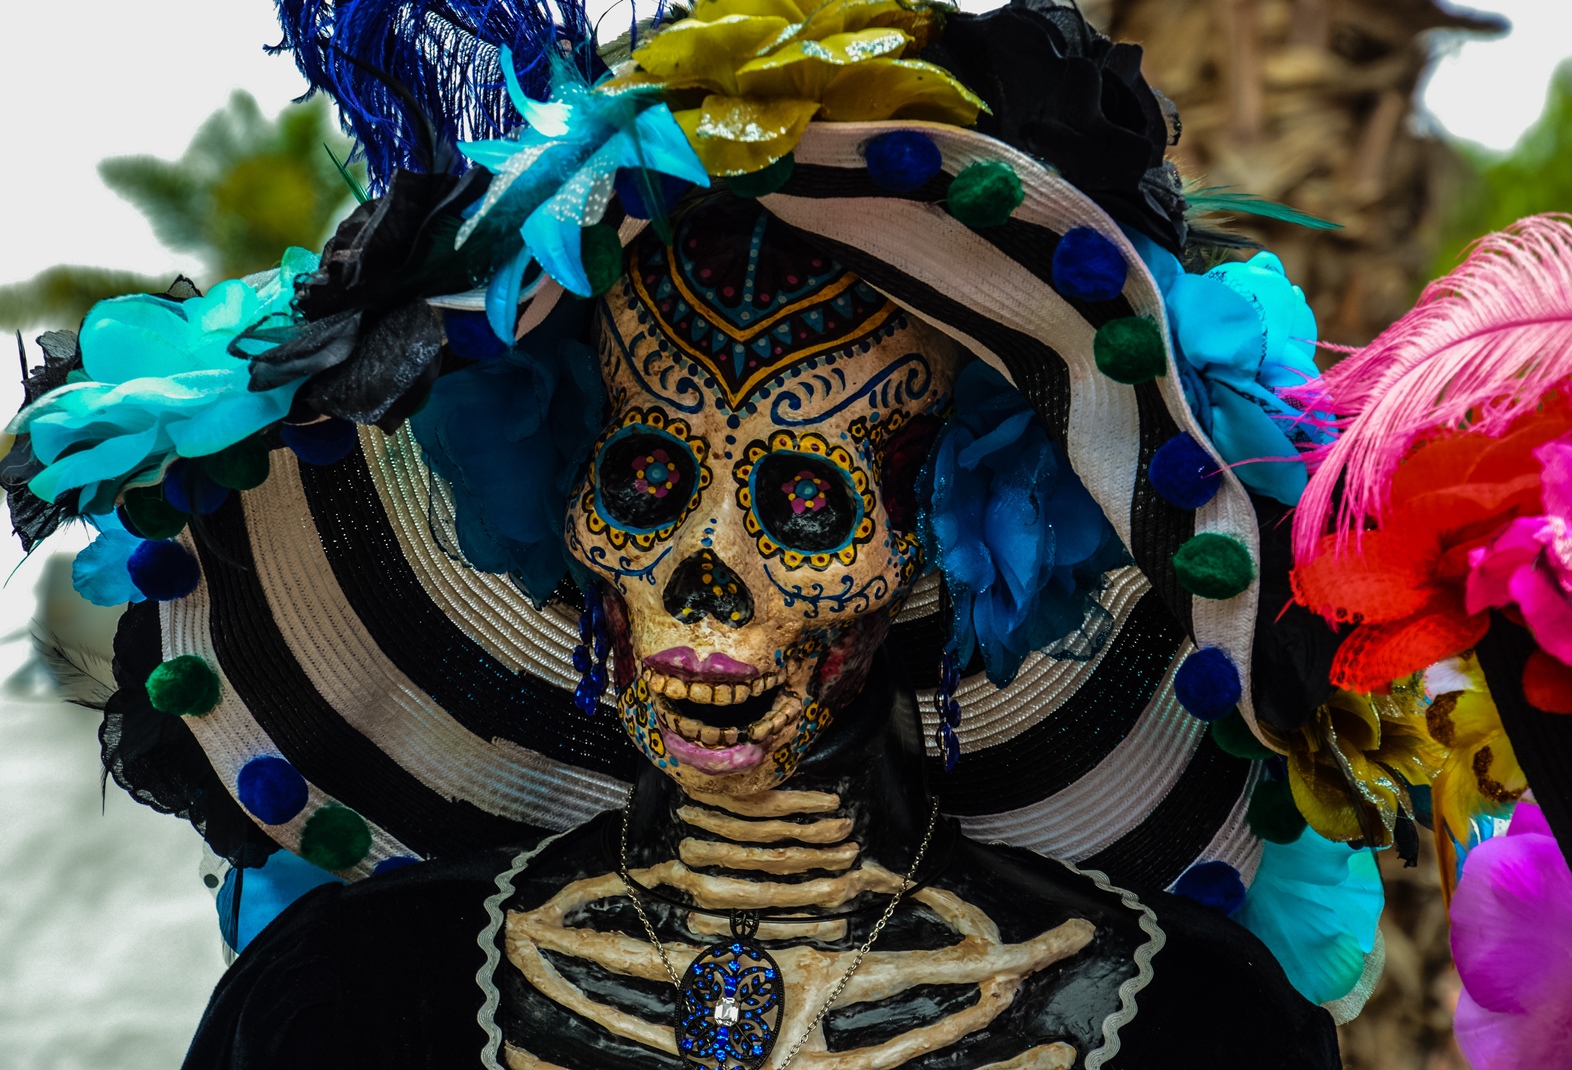 Celebrating Day of the Dead in Mexico